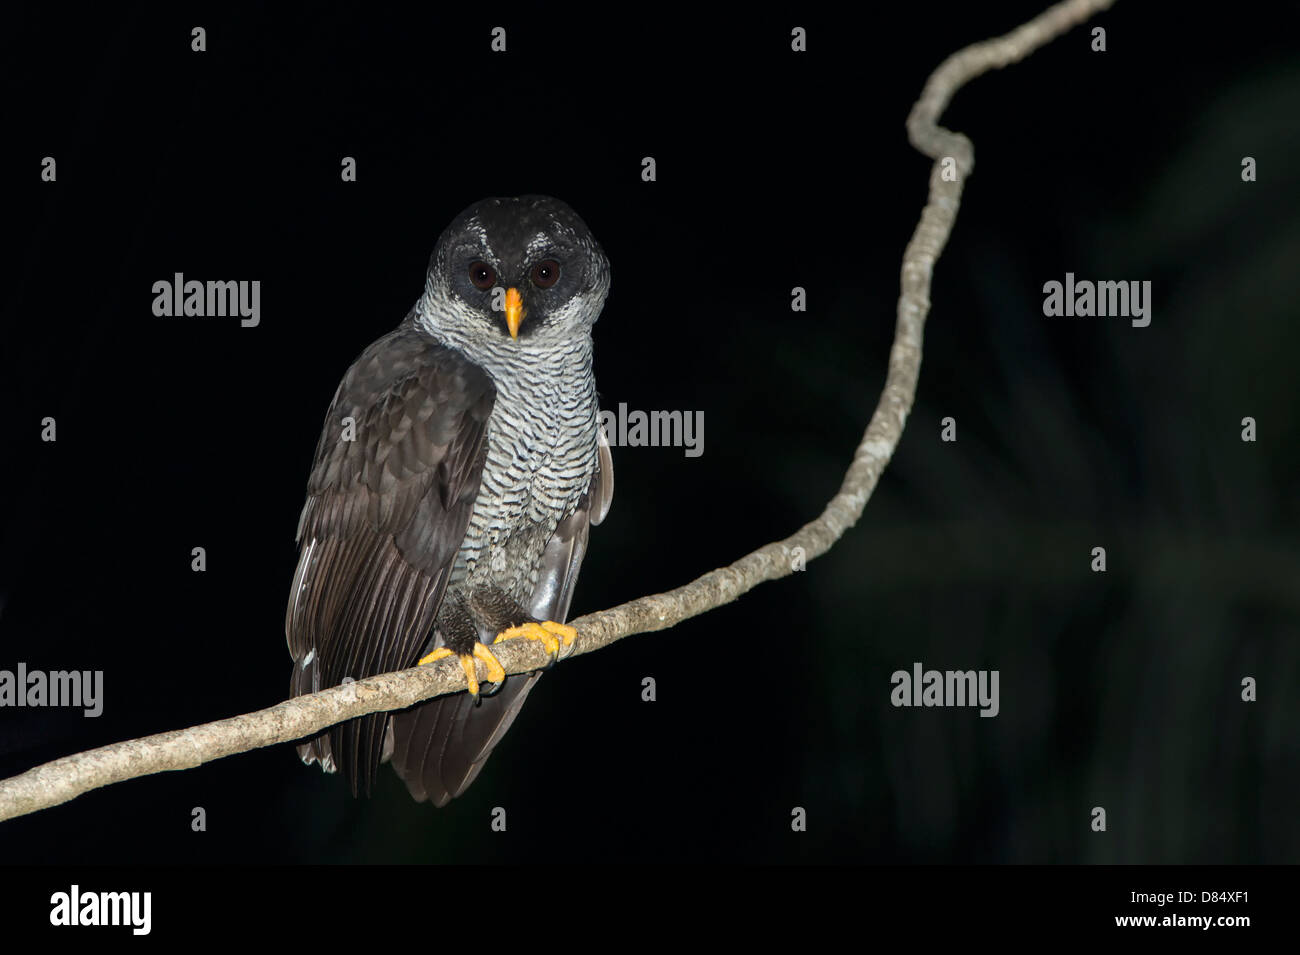 Black-and-white Owl perched on branch at night  in Costa Rica, Central America Stock Photo